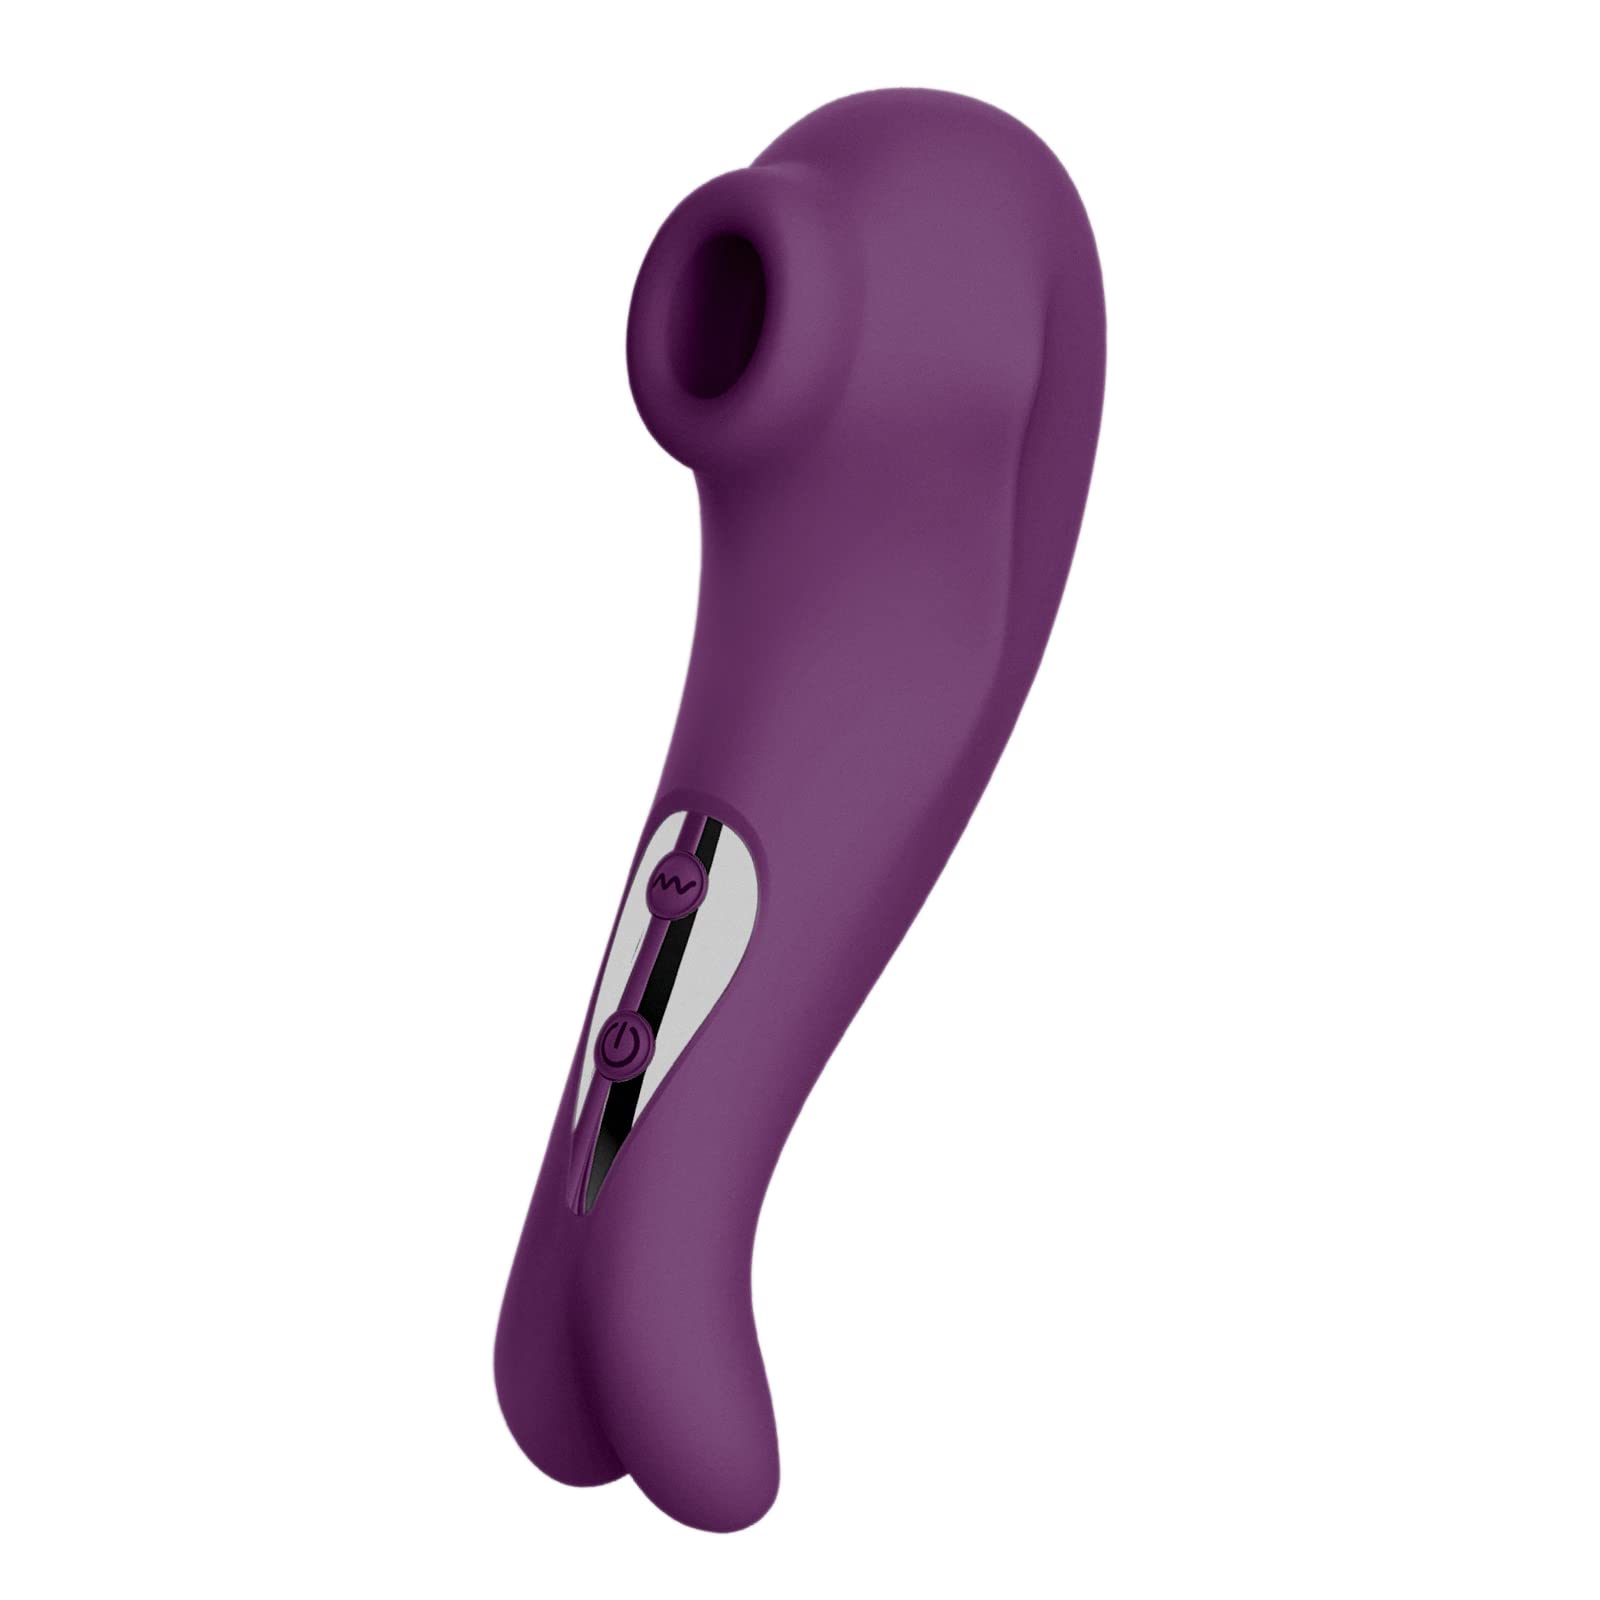 Rose Toy for Woman 2023 Upgraded Female Rose Toys Vibrator for Women-Purple  